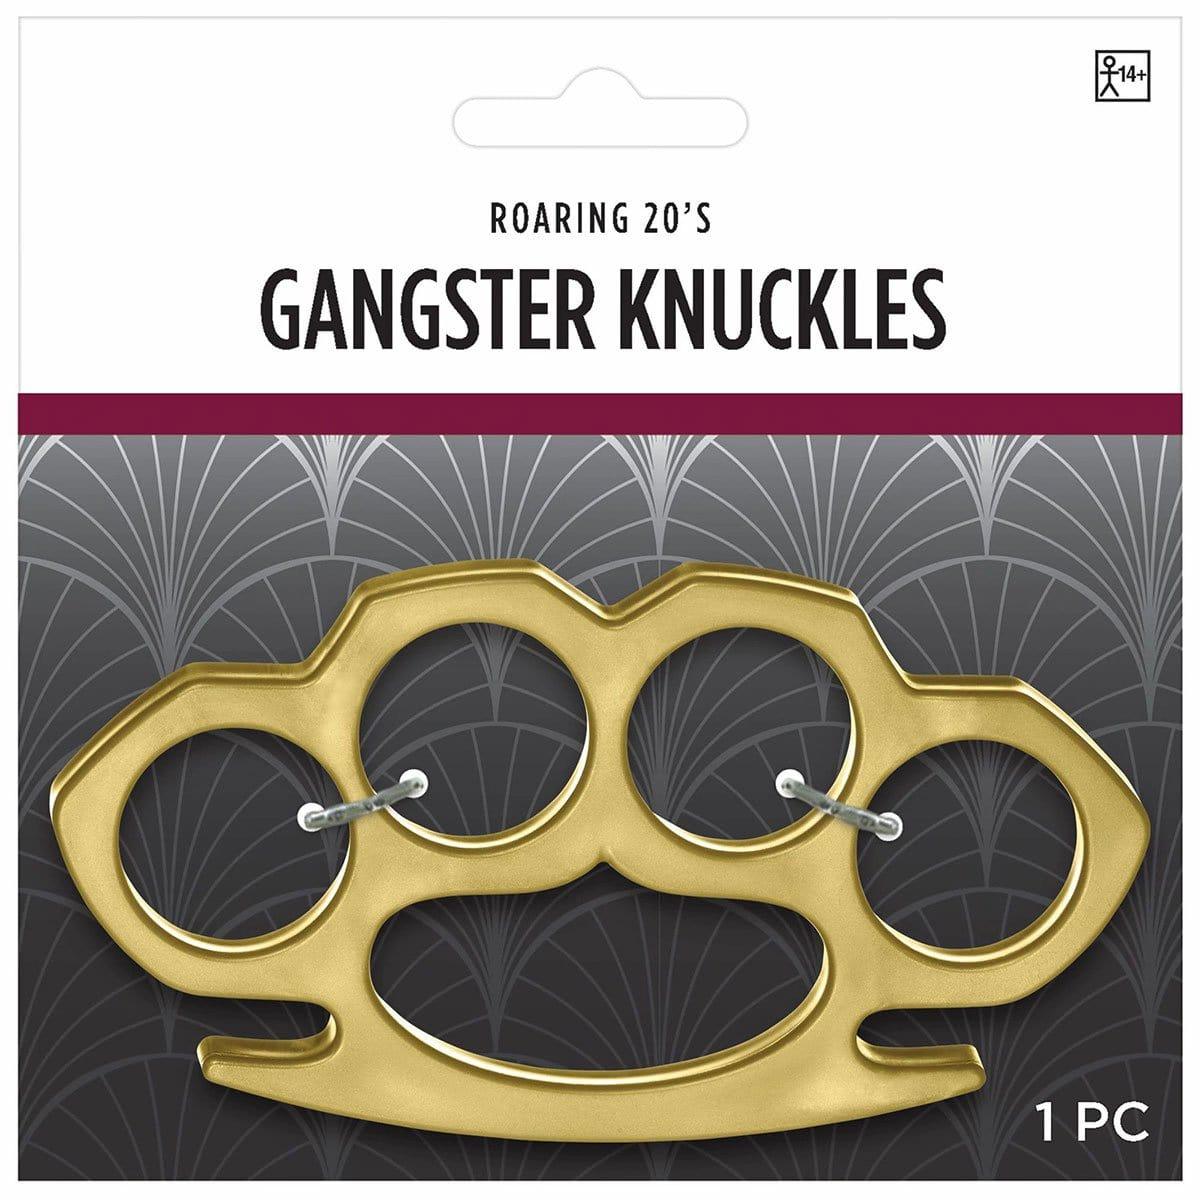 Buy Costume Accessories Imitation Gangster Knuckles sold at Party Expert